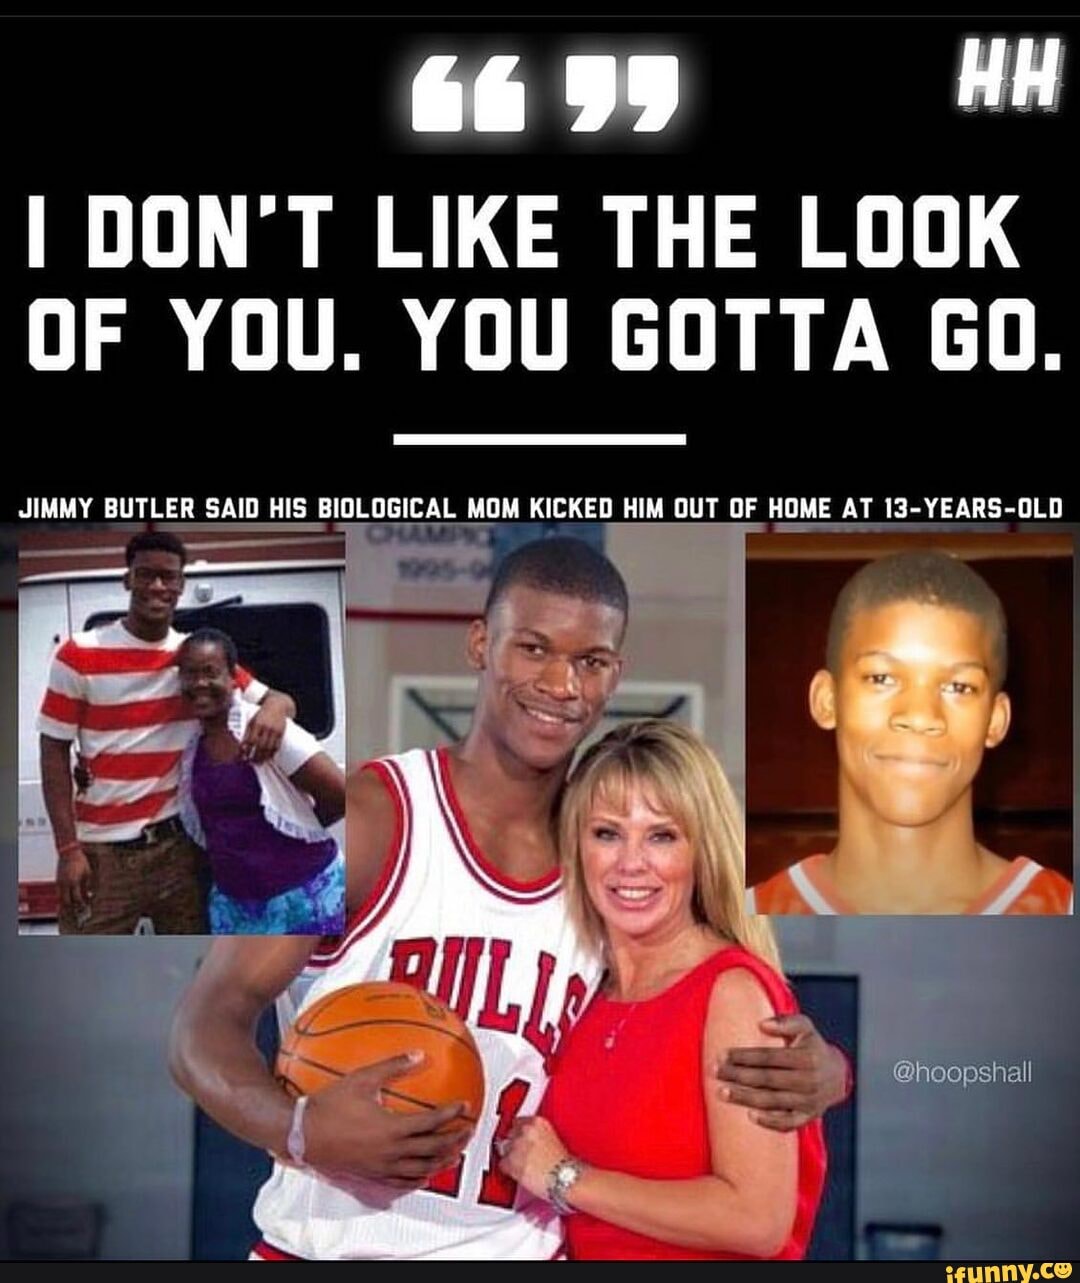 you gotta love what you do, jimmy butler